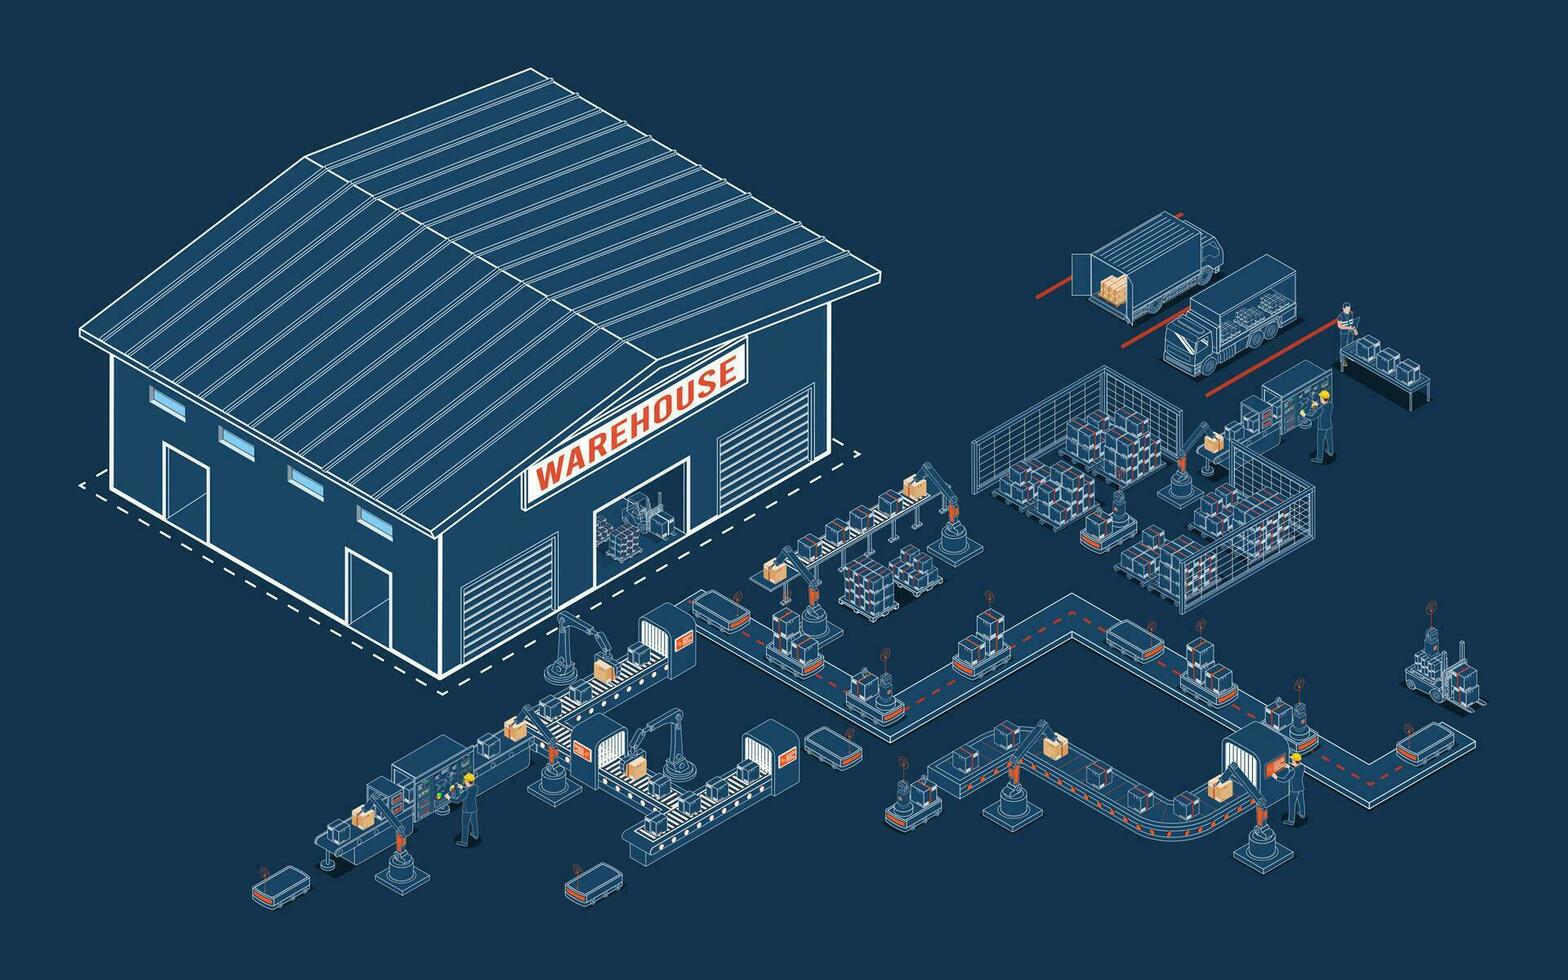 Smart Warehouse Management System with Warehouse simulation, Logistics flexibility, Robotic process automation and Accurate inventory counts. Vector illustration eps10